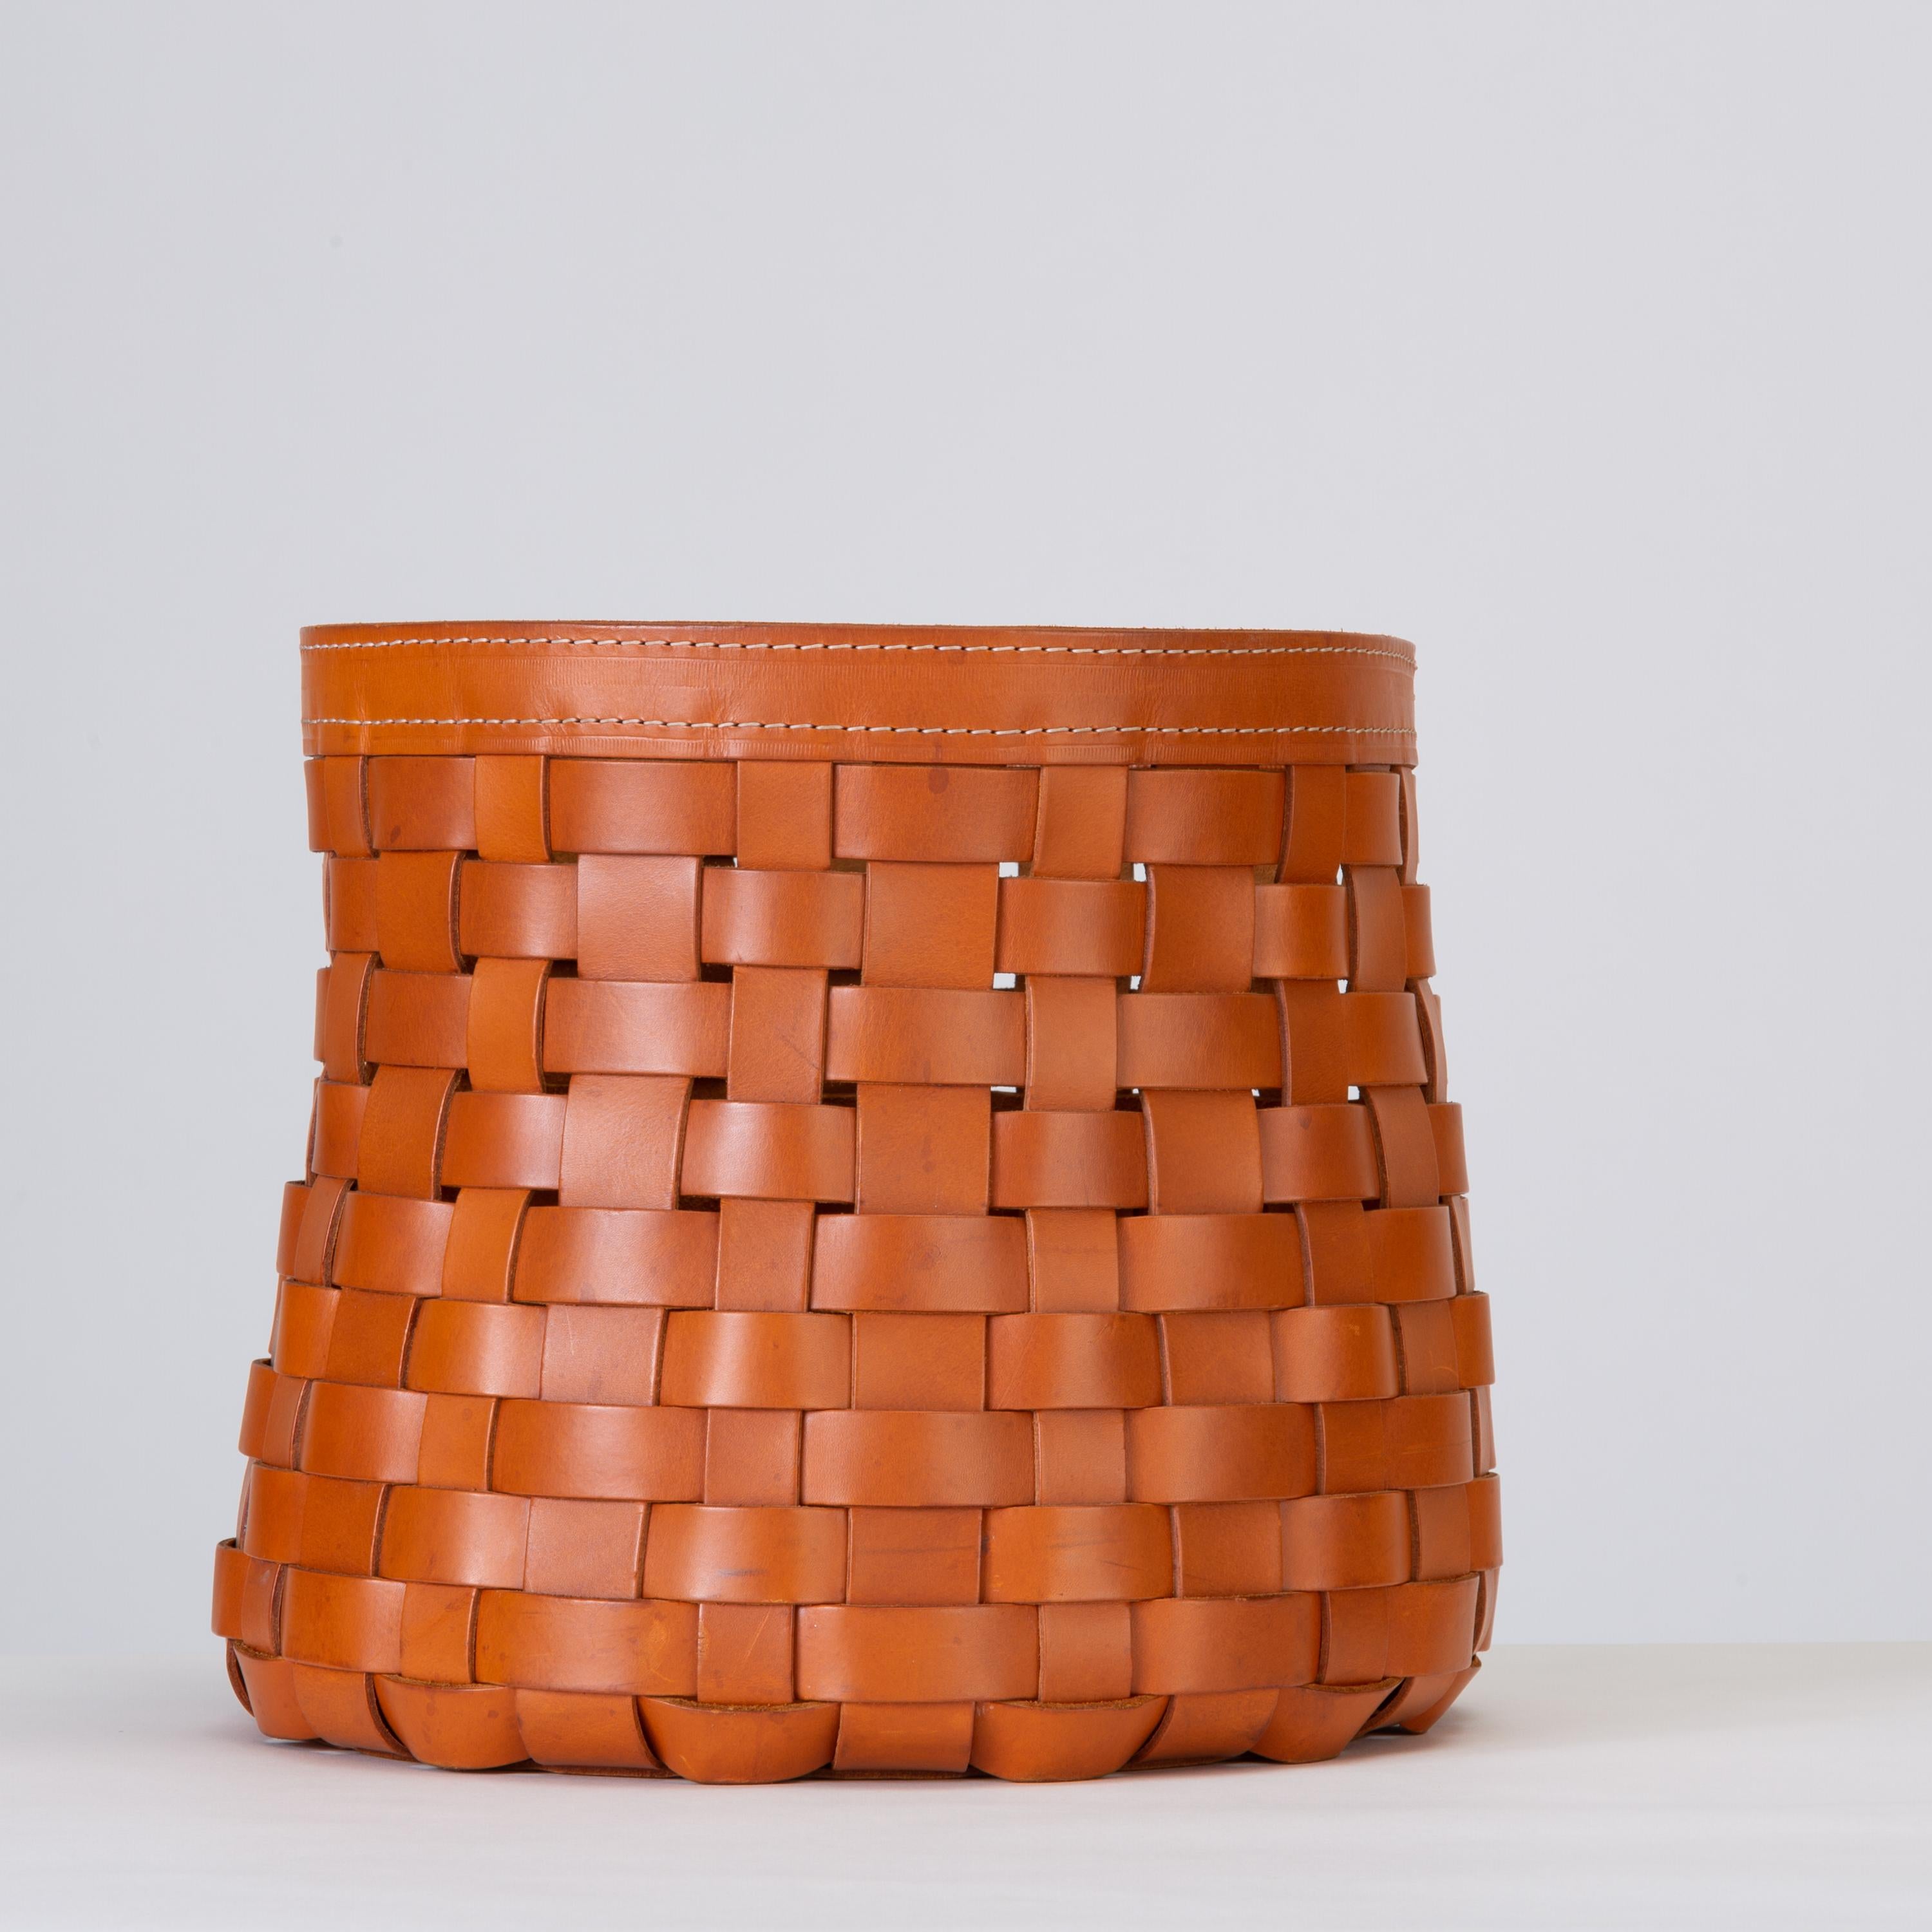 An Italian-made decorative basket or storage vessel by Arte Cuoio e Triangolo. The rounded piece widens towards the reinforced foot, with a thick band of matching leather around the lip. The basket weave of the leather pays homage to a time-honored